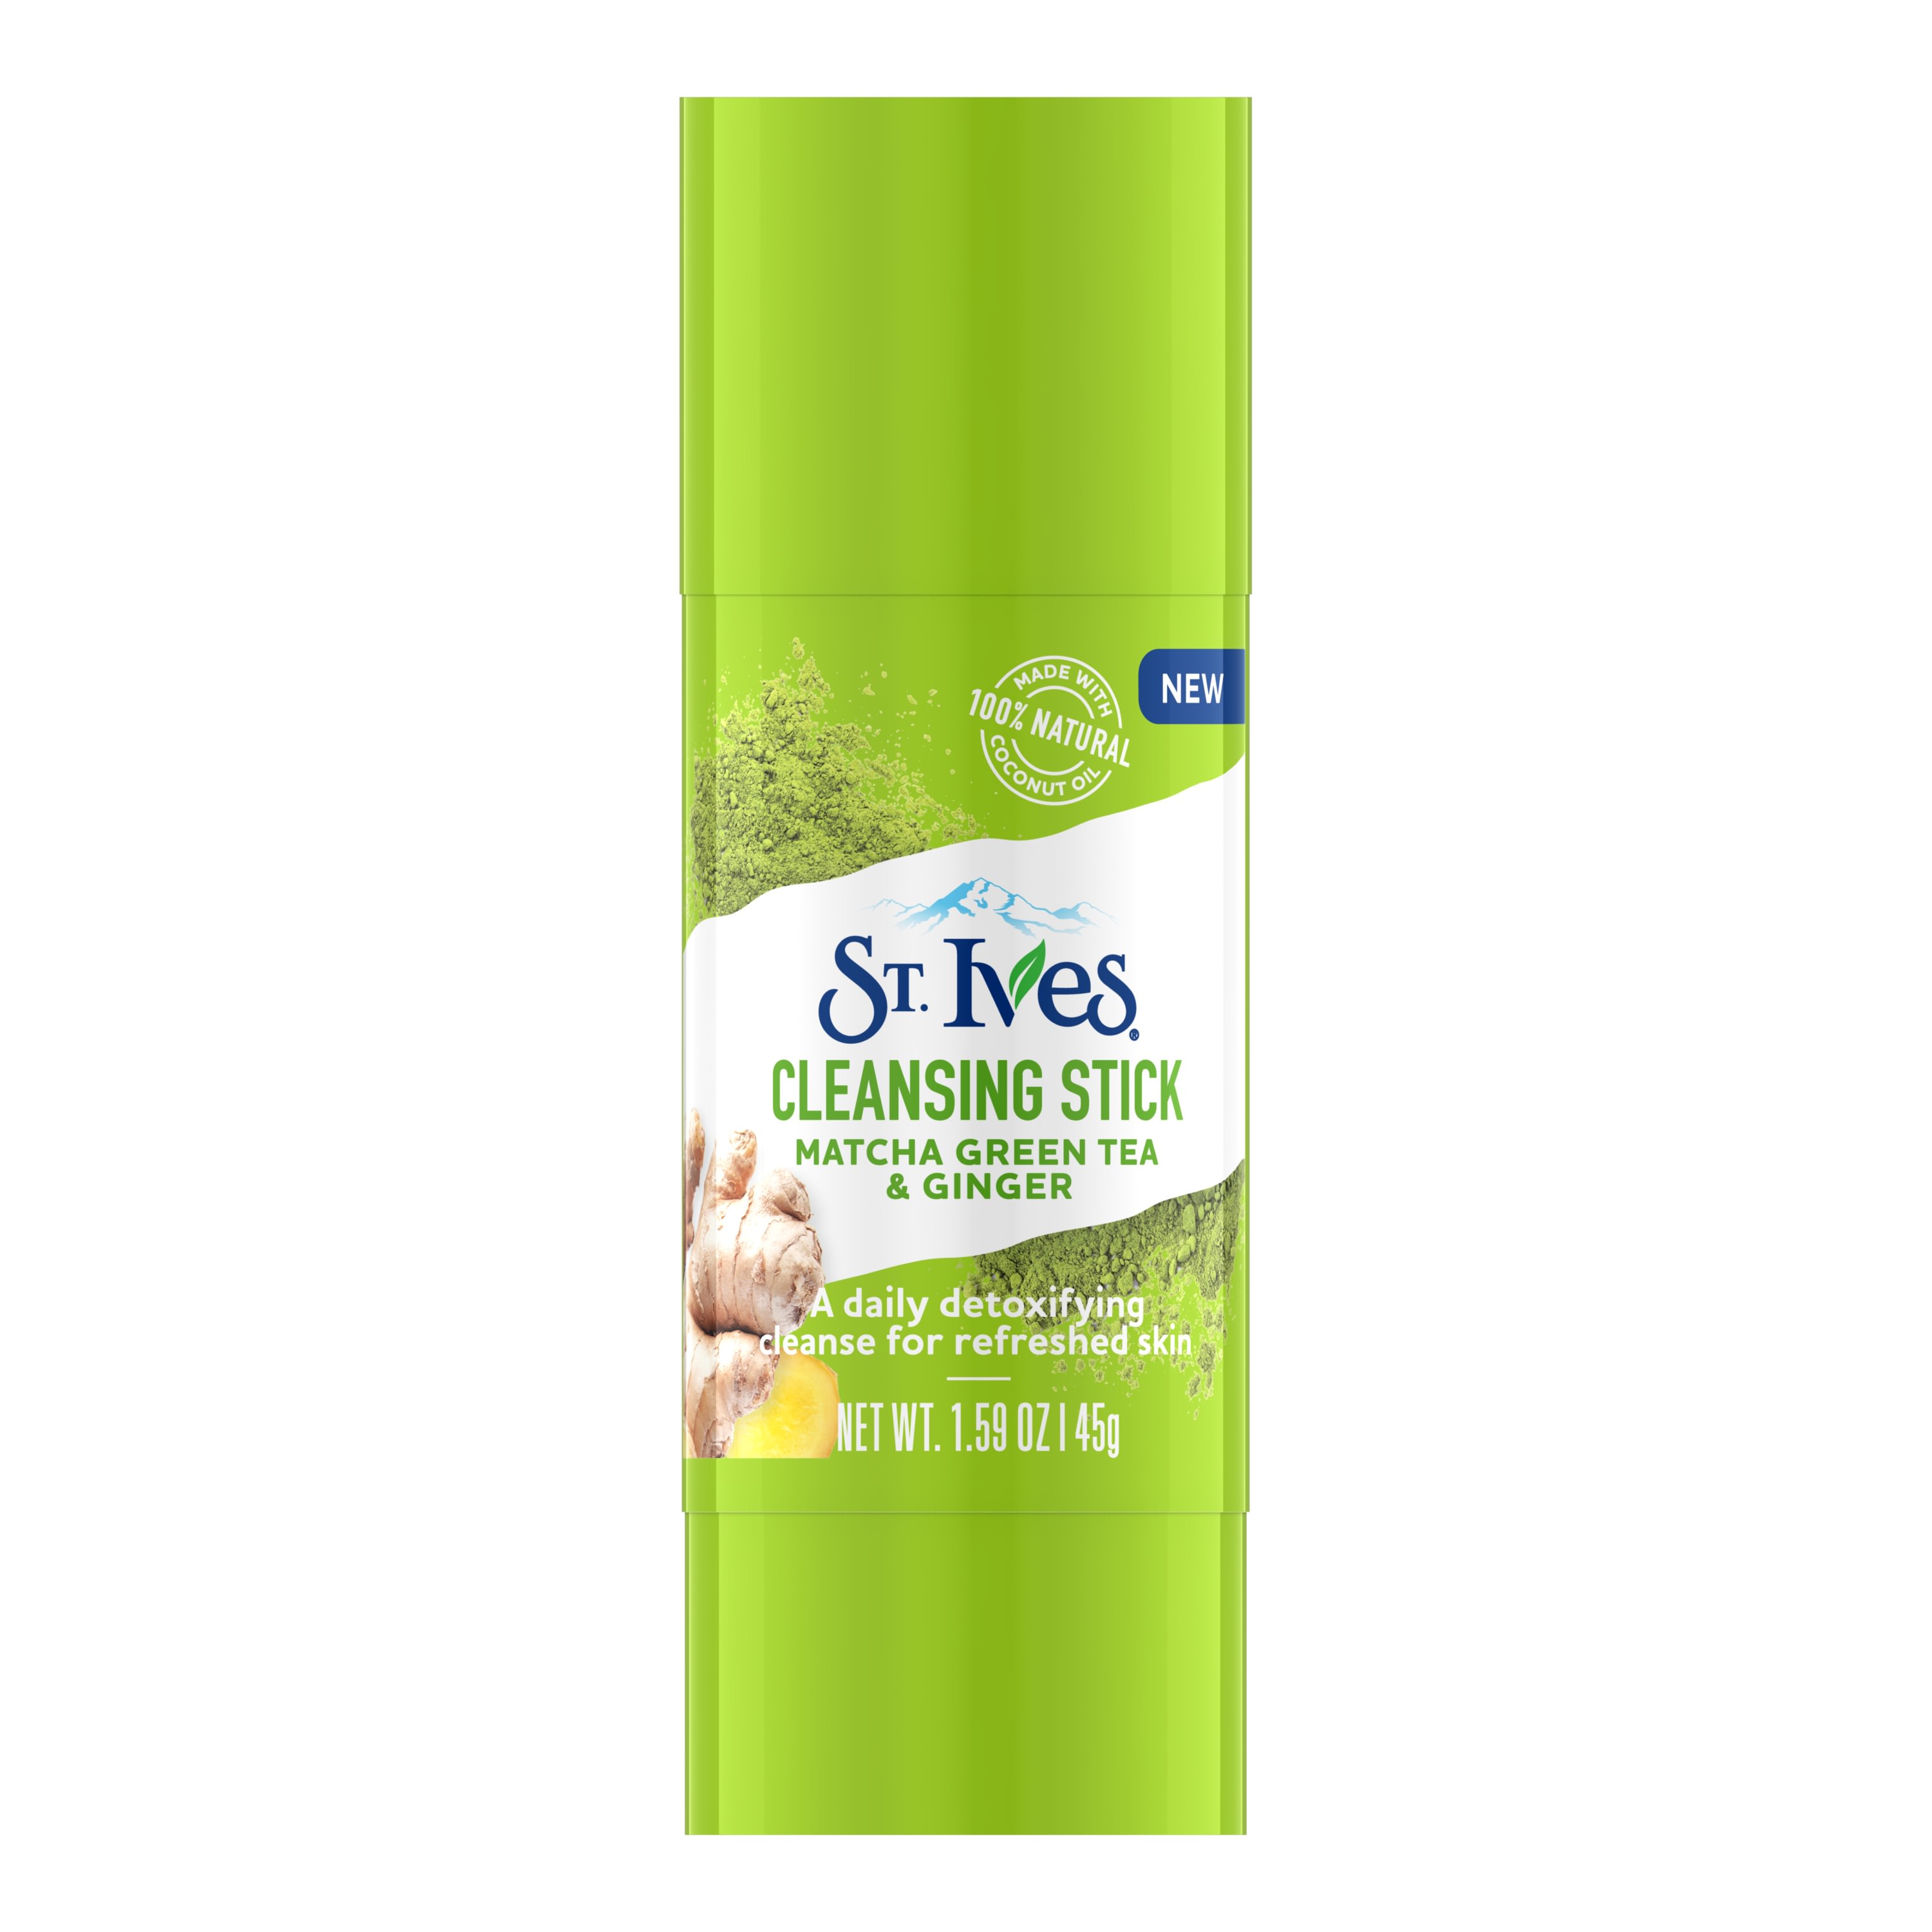 St. Ives Matcha Green Tea and Ginger Cleansing Stick, 1.6 oz - image 1 of 5